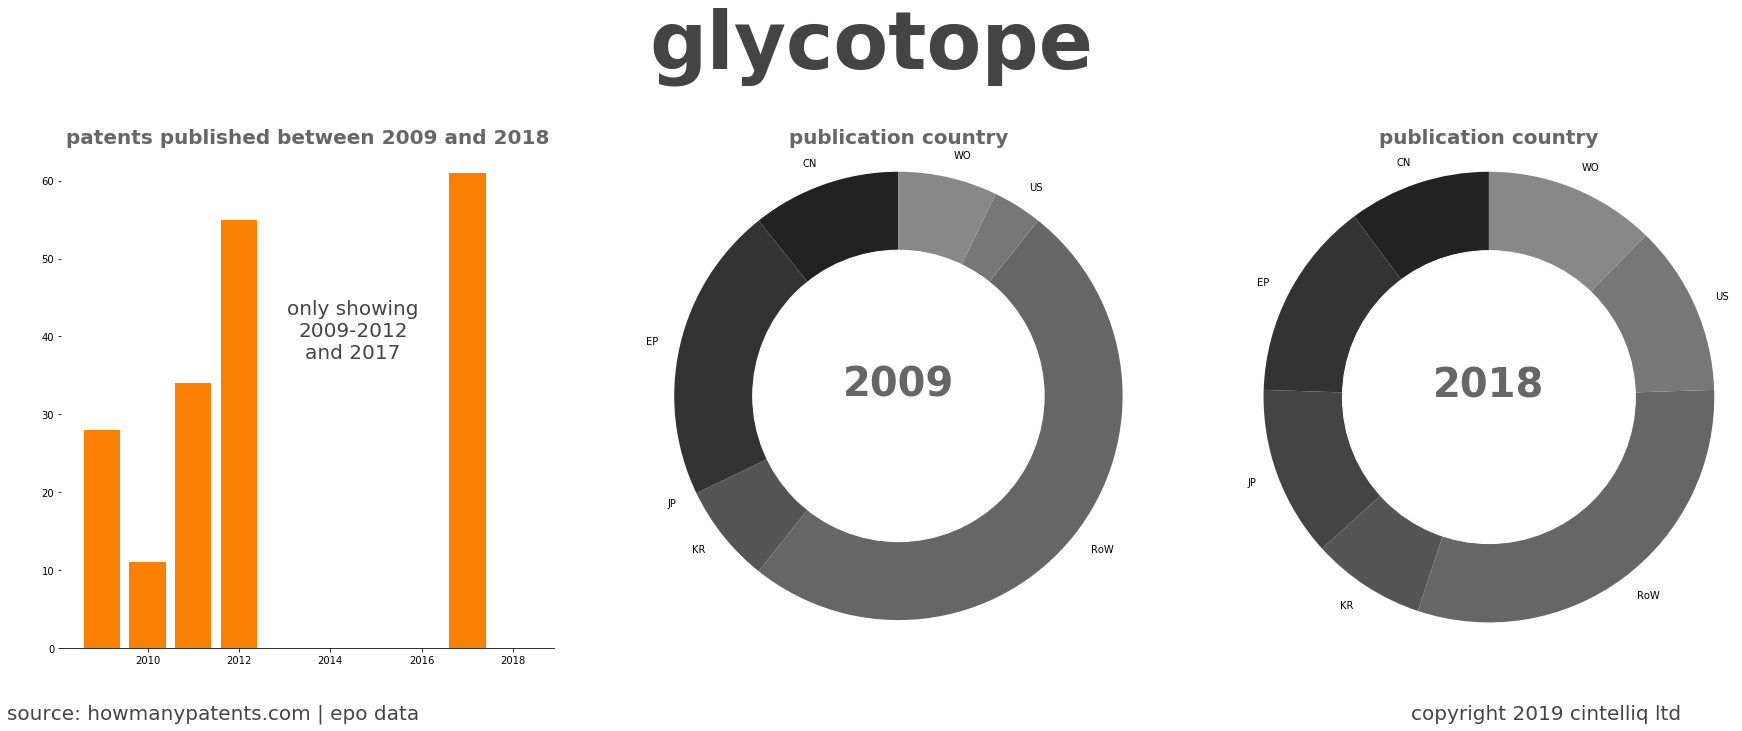 summary of patents for Glycotope